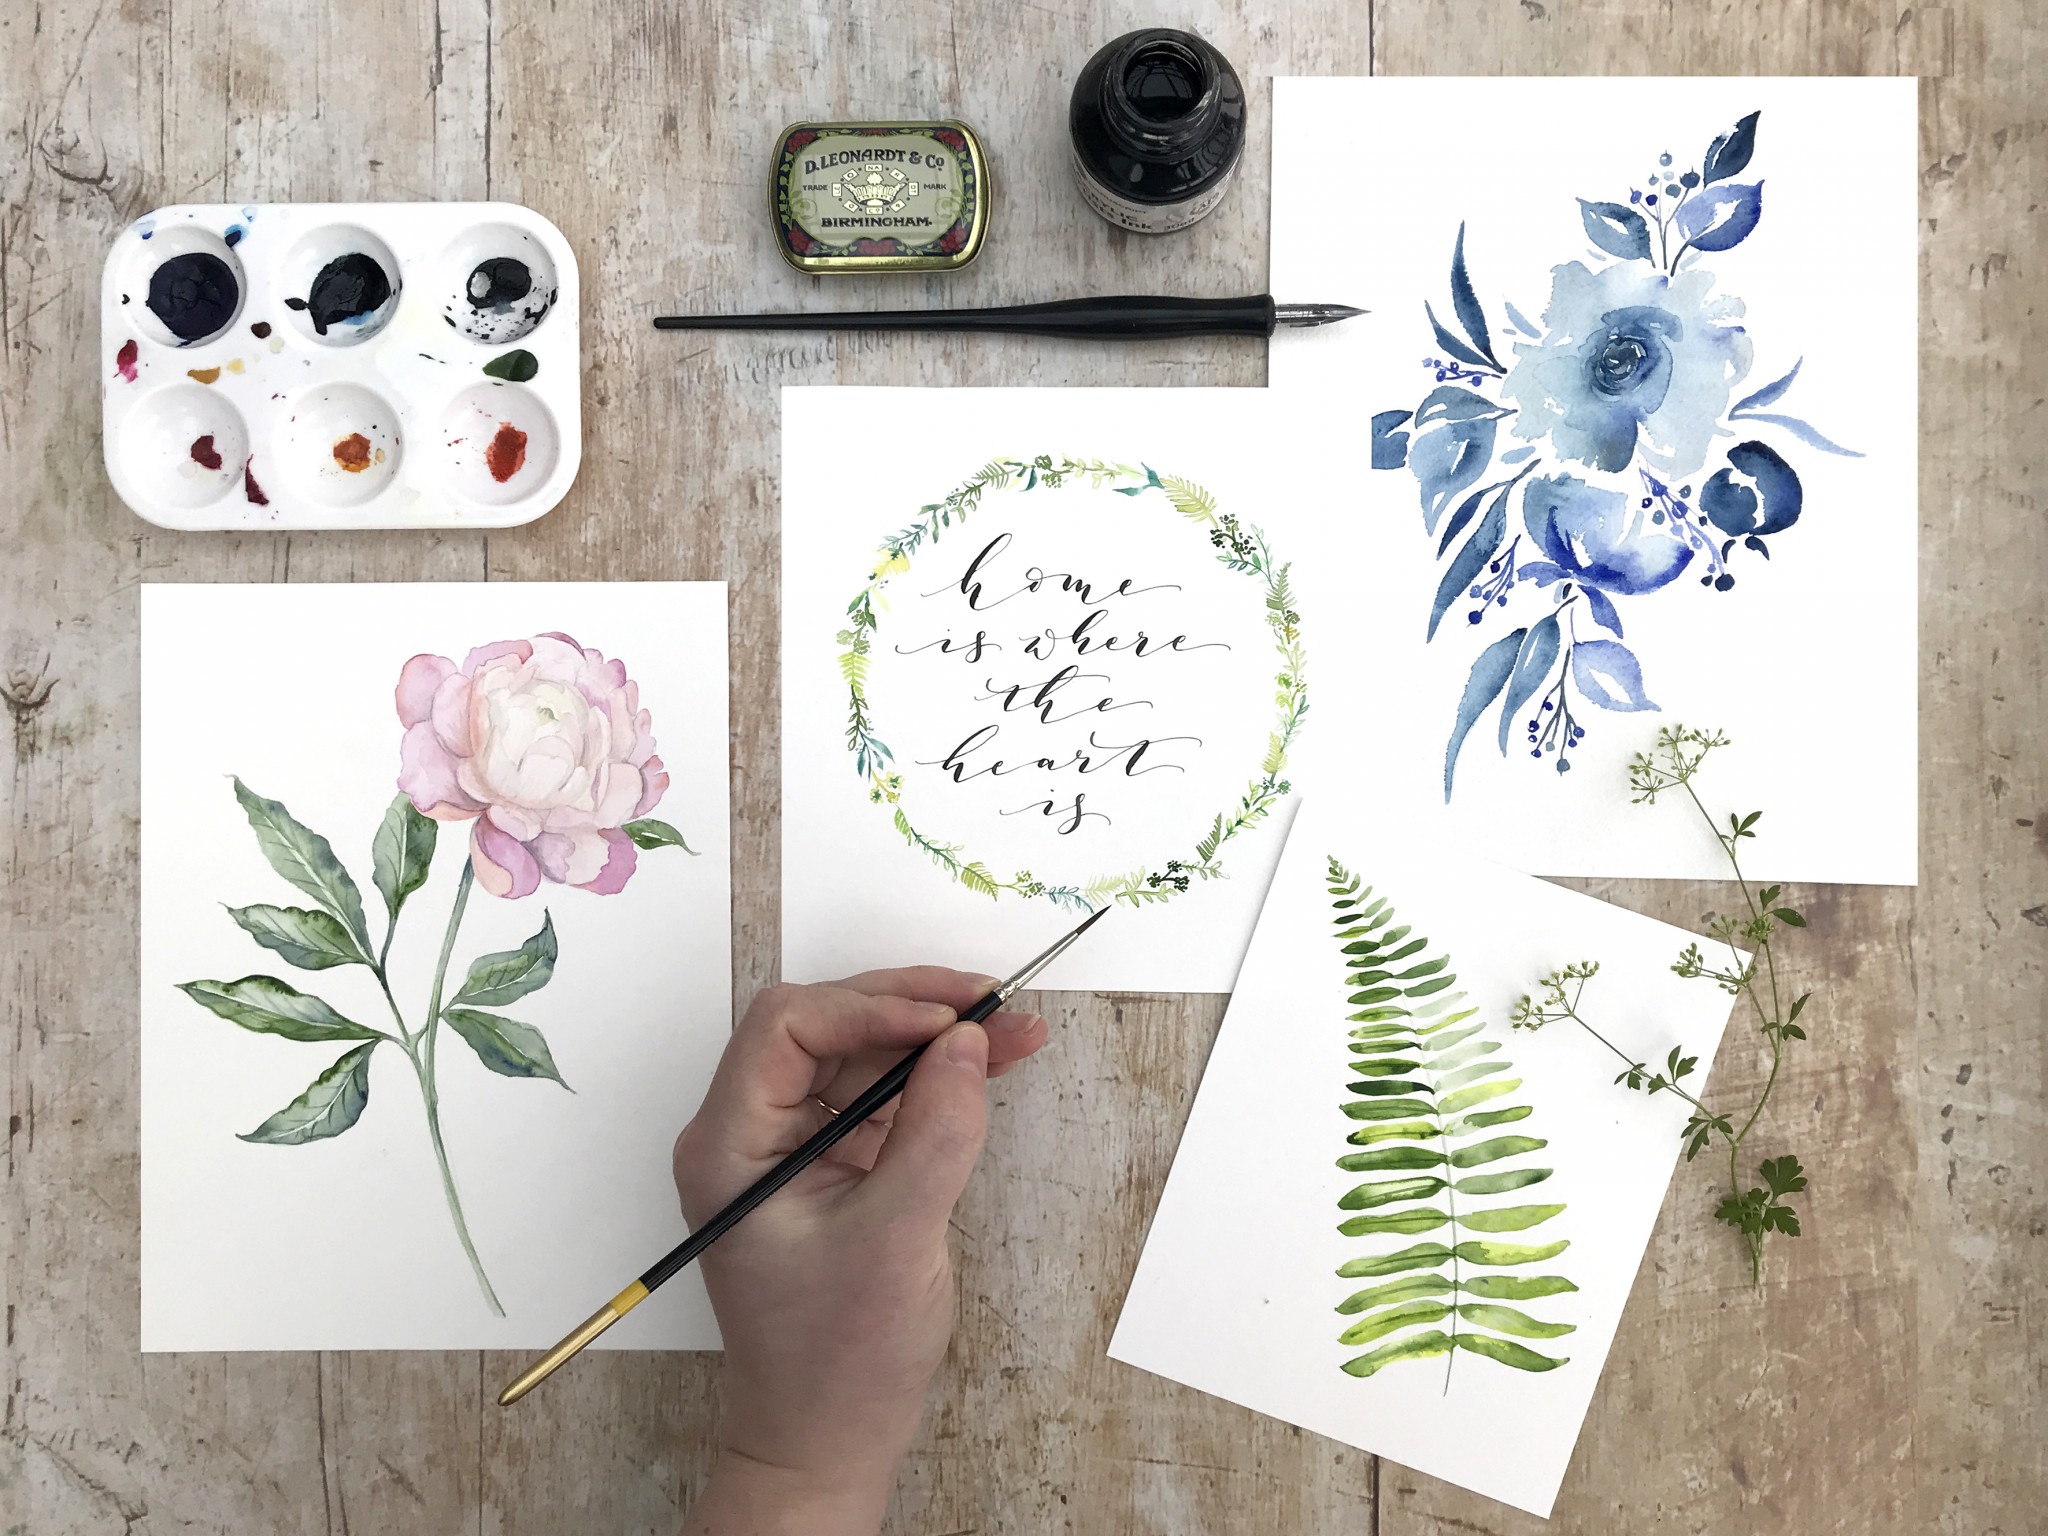 Watercolour and calligraphy at River cottage